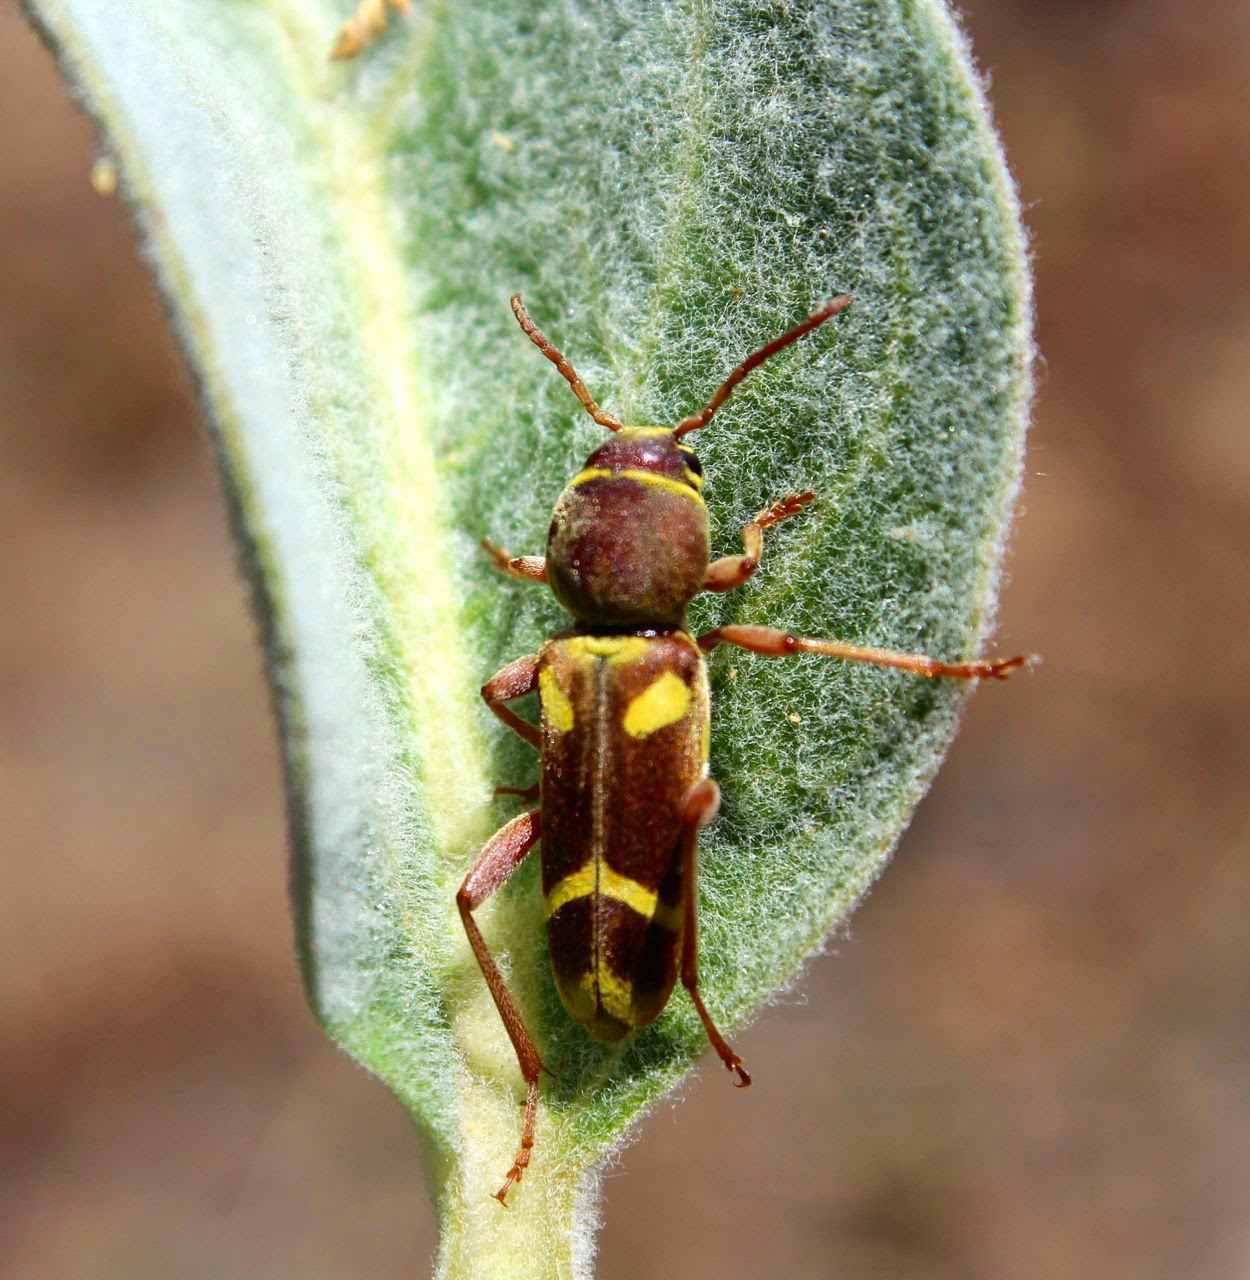 Another interesting and colorful beetle found on milkweed